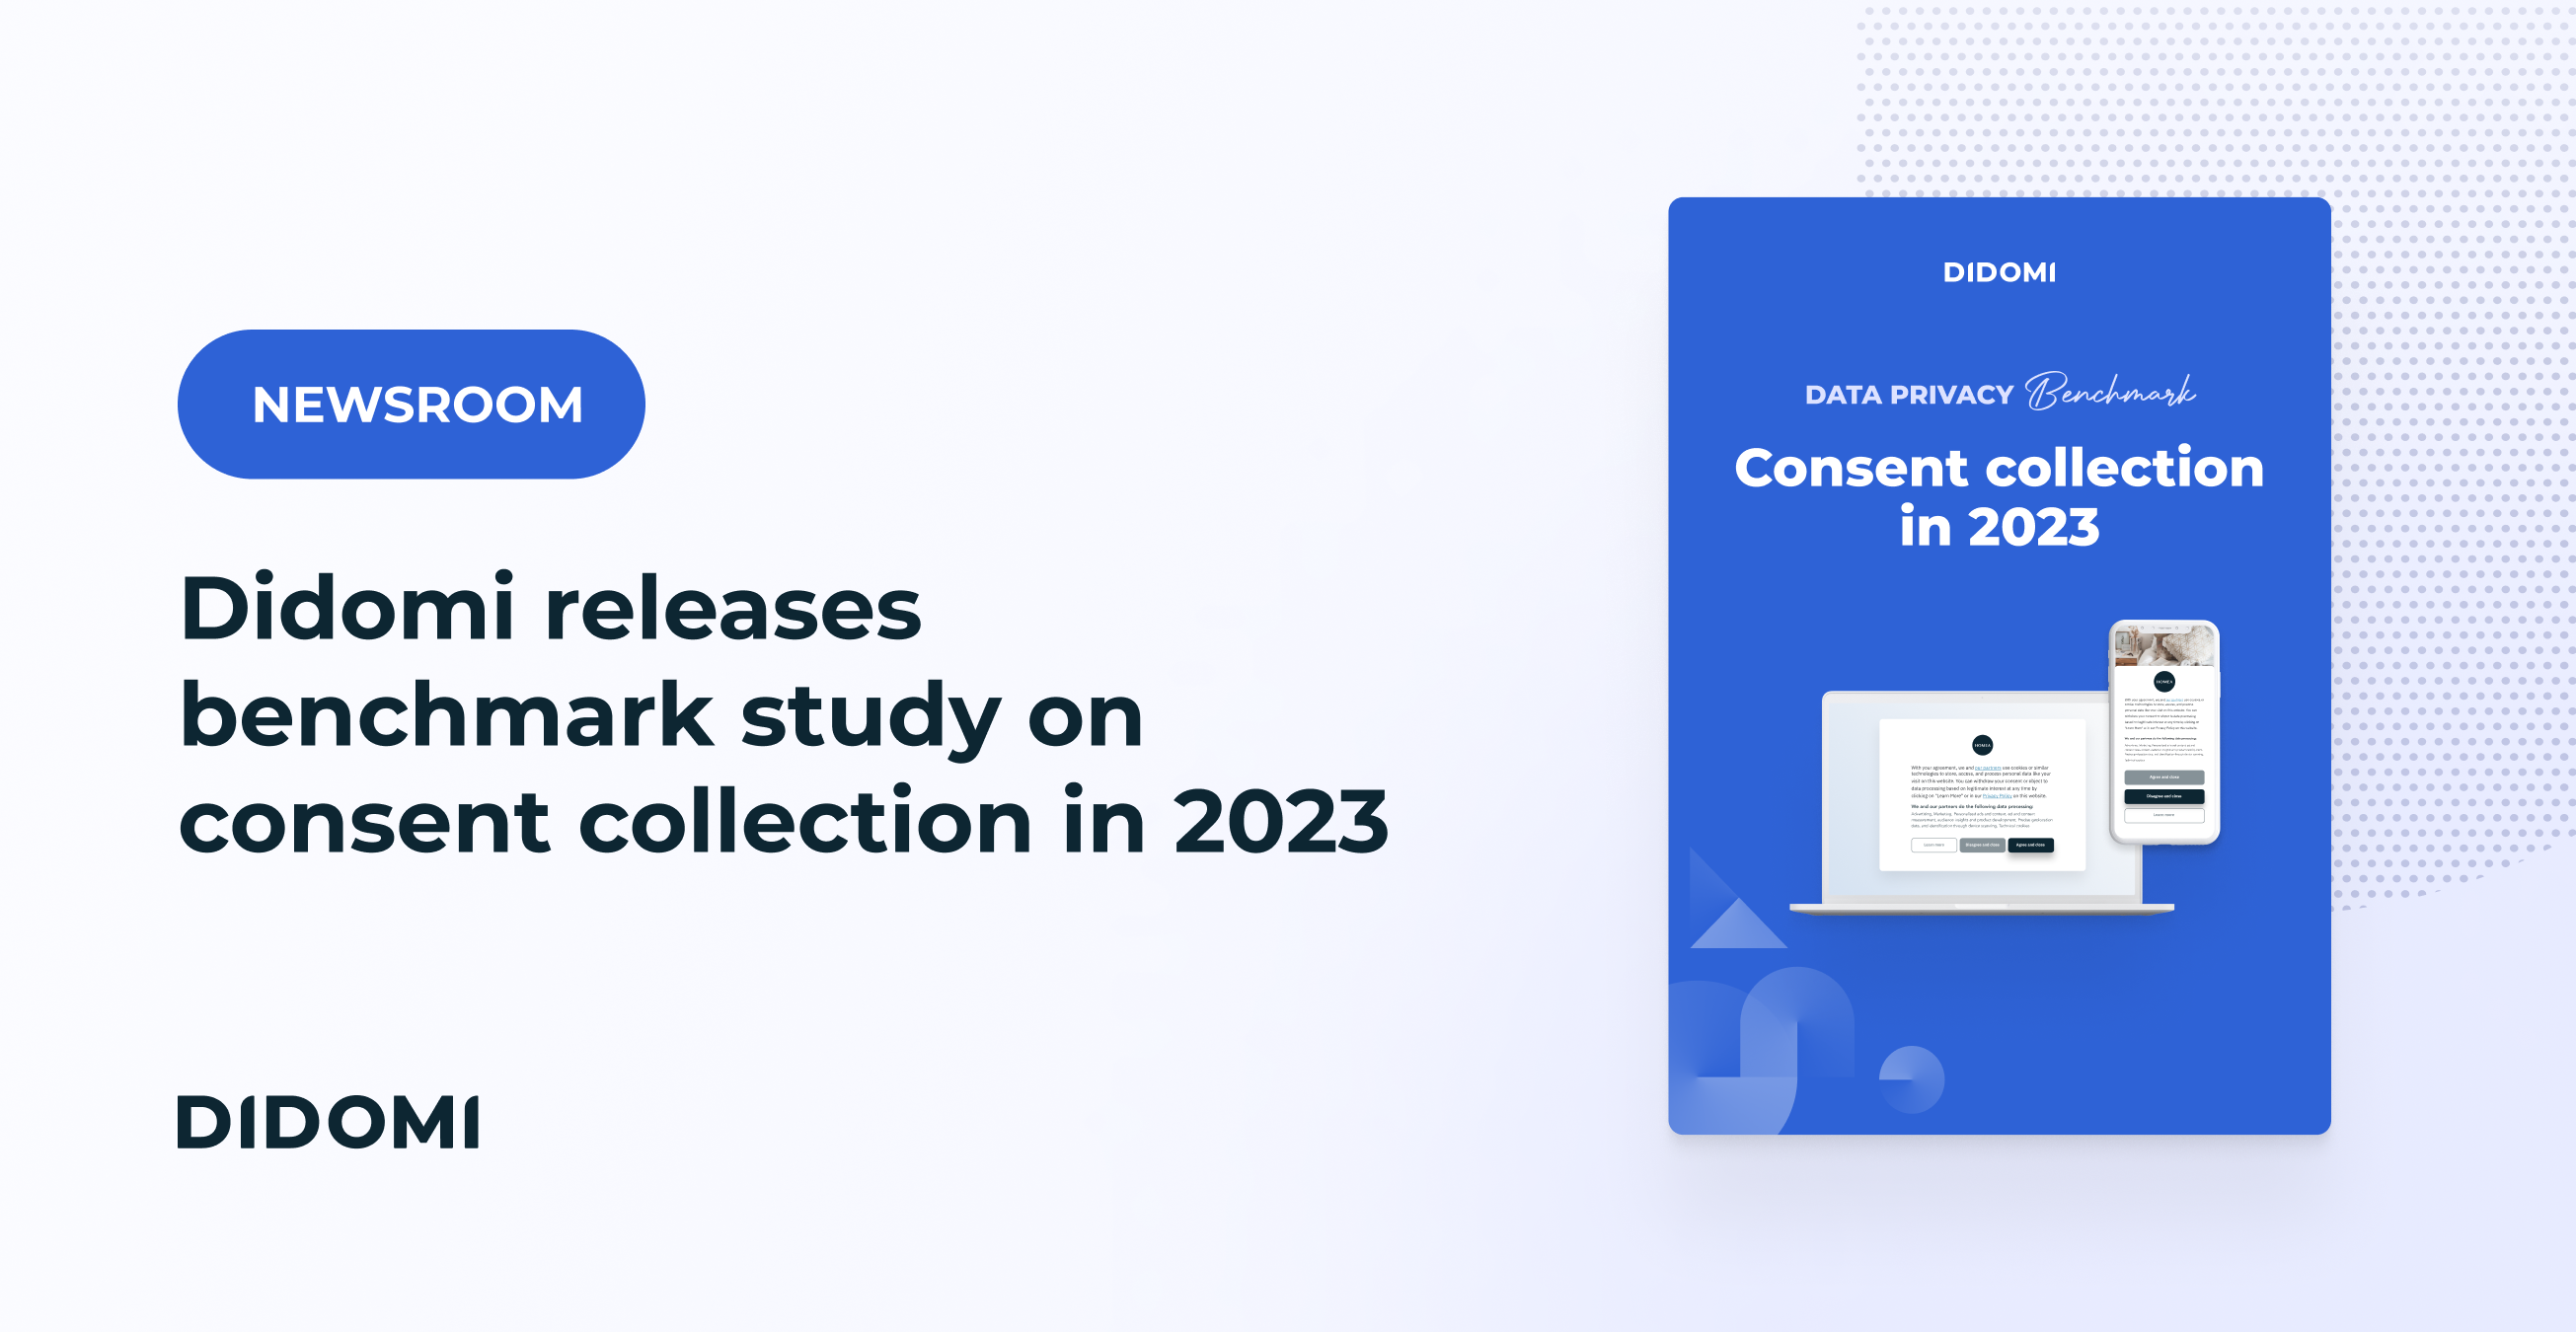 Didomi releases benchmark study on consent collection in 2023